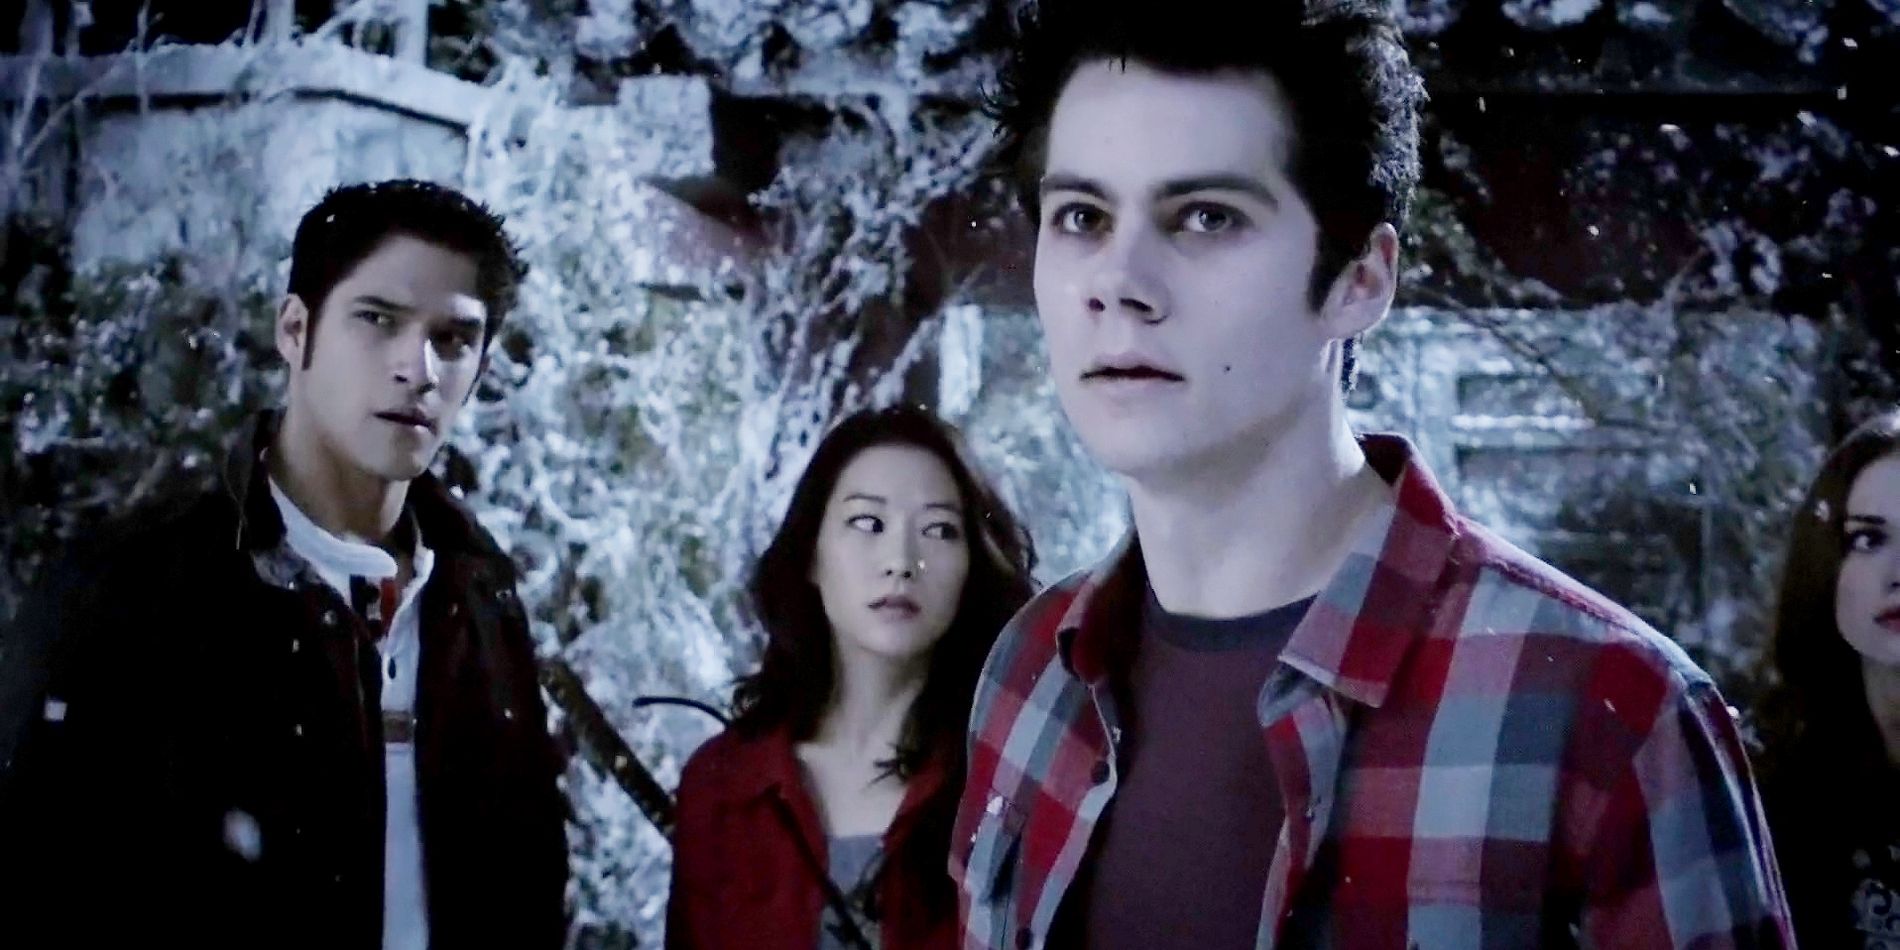 Stiles, Scott and Kira fighting the Nogitsune in the snowy landscape illusion with Stiles in the front looking serious.